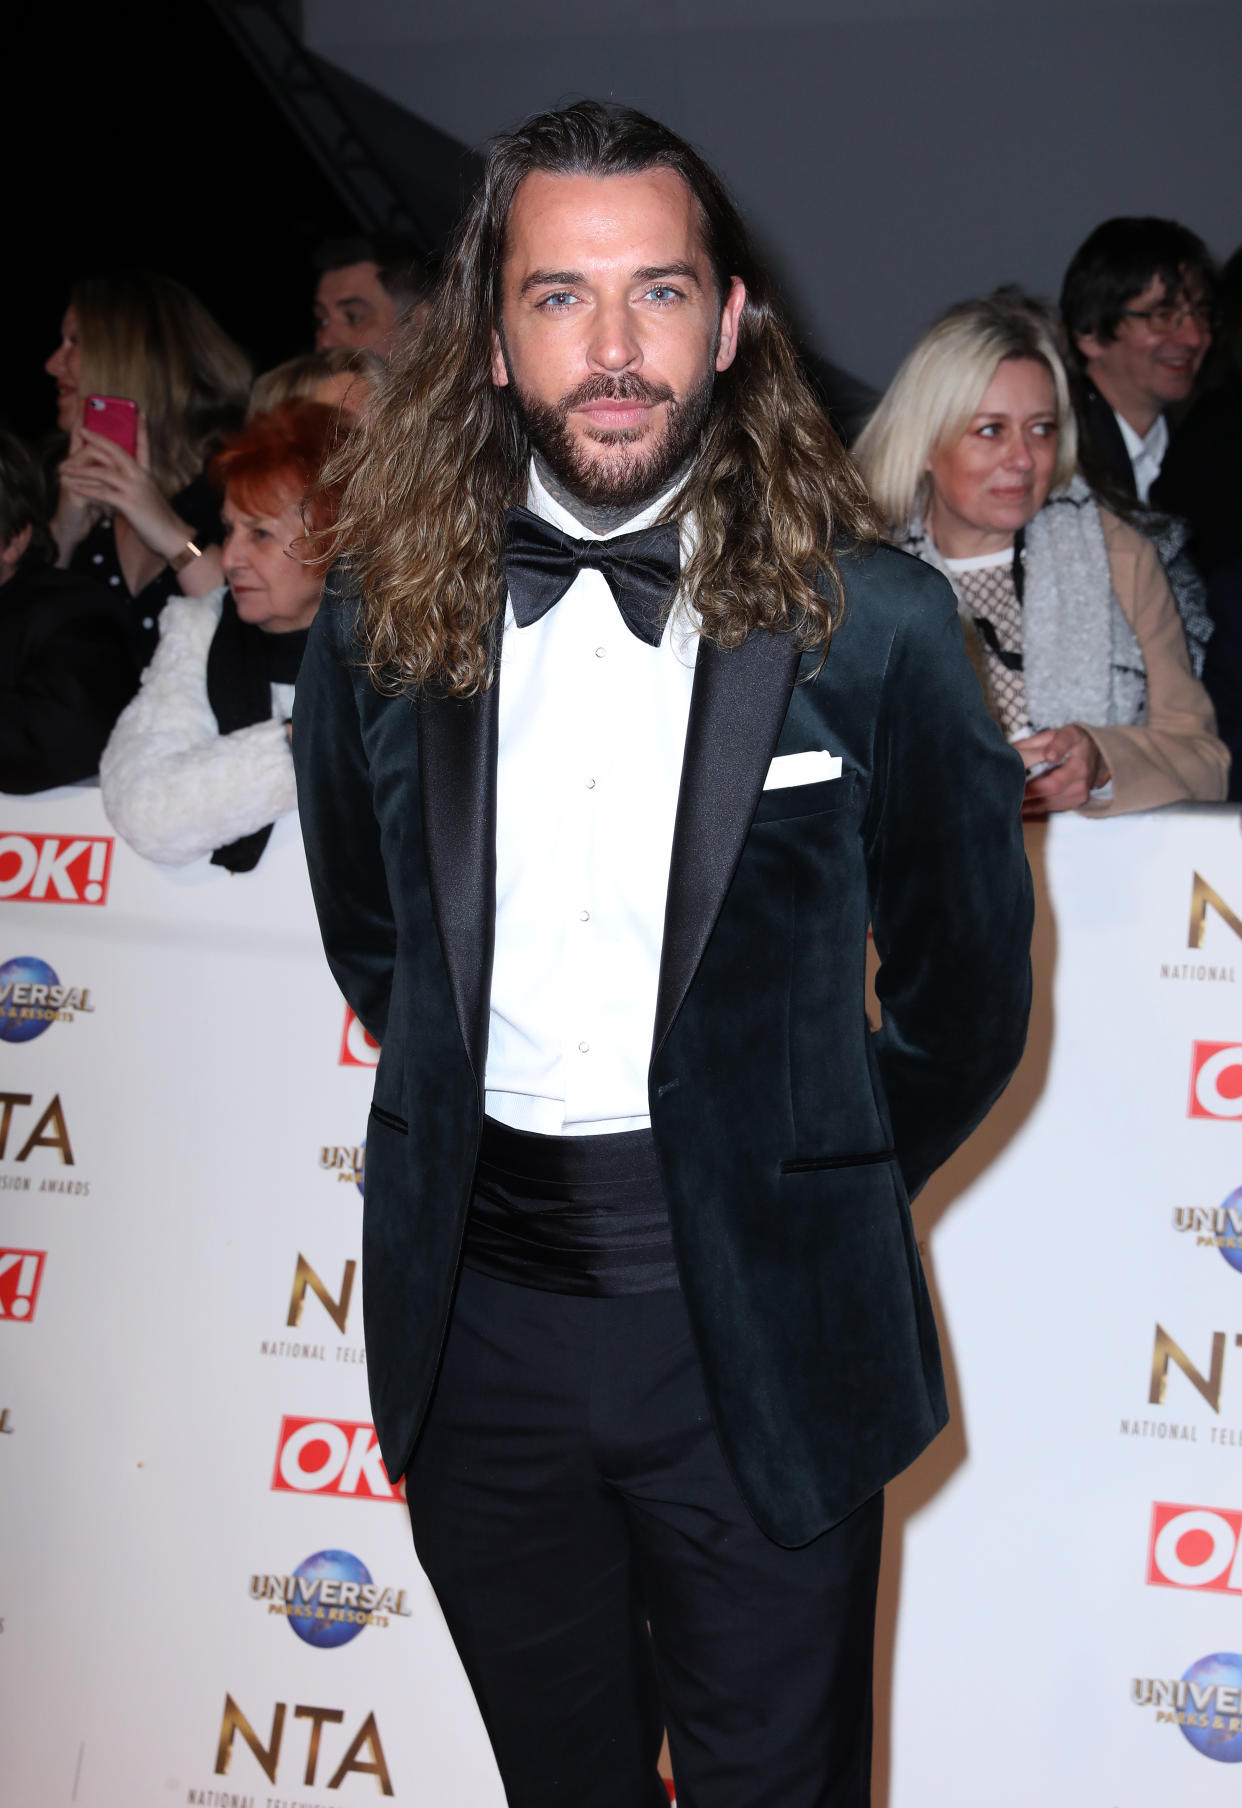 Pete Wicks attending the National Television Awards 2020 held at the O2 Arena, London.